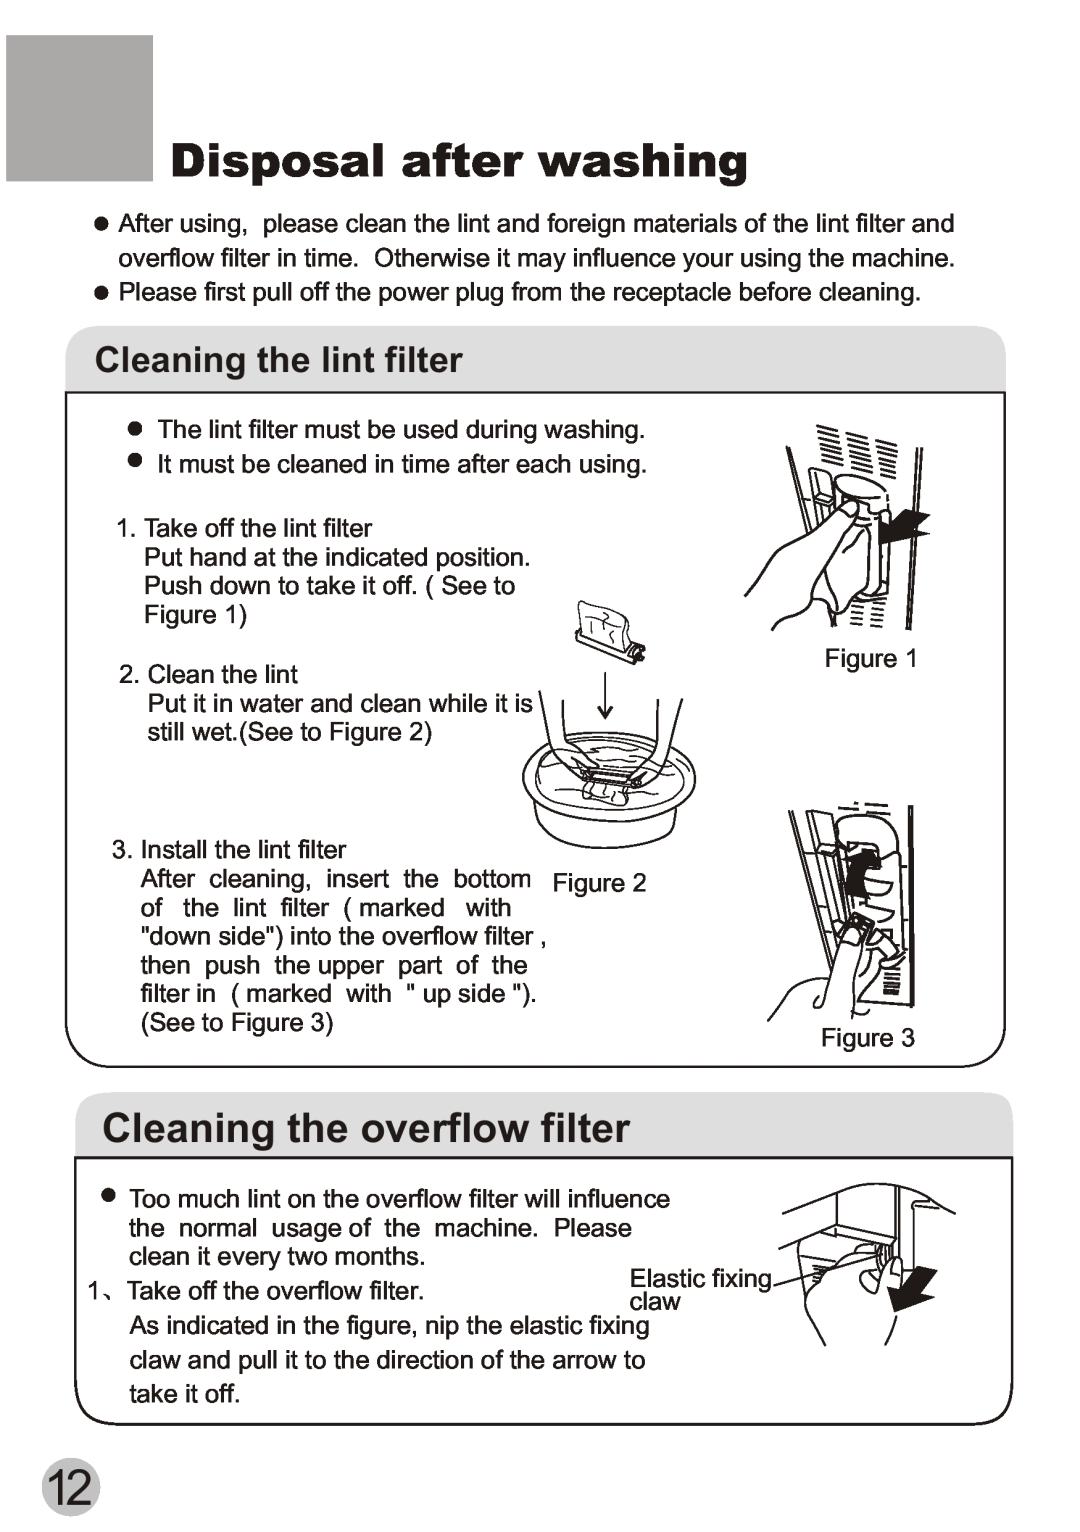 Haier WD55dHSHAT user manual Disposal after washing, Cleaning the overflow filter, Cleaning the lint filter 